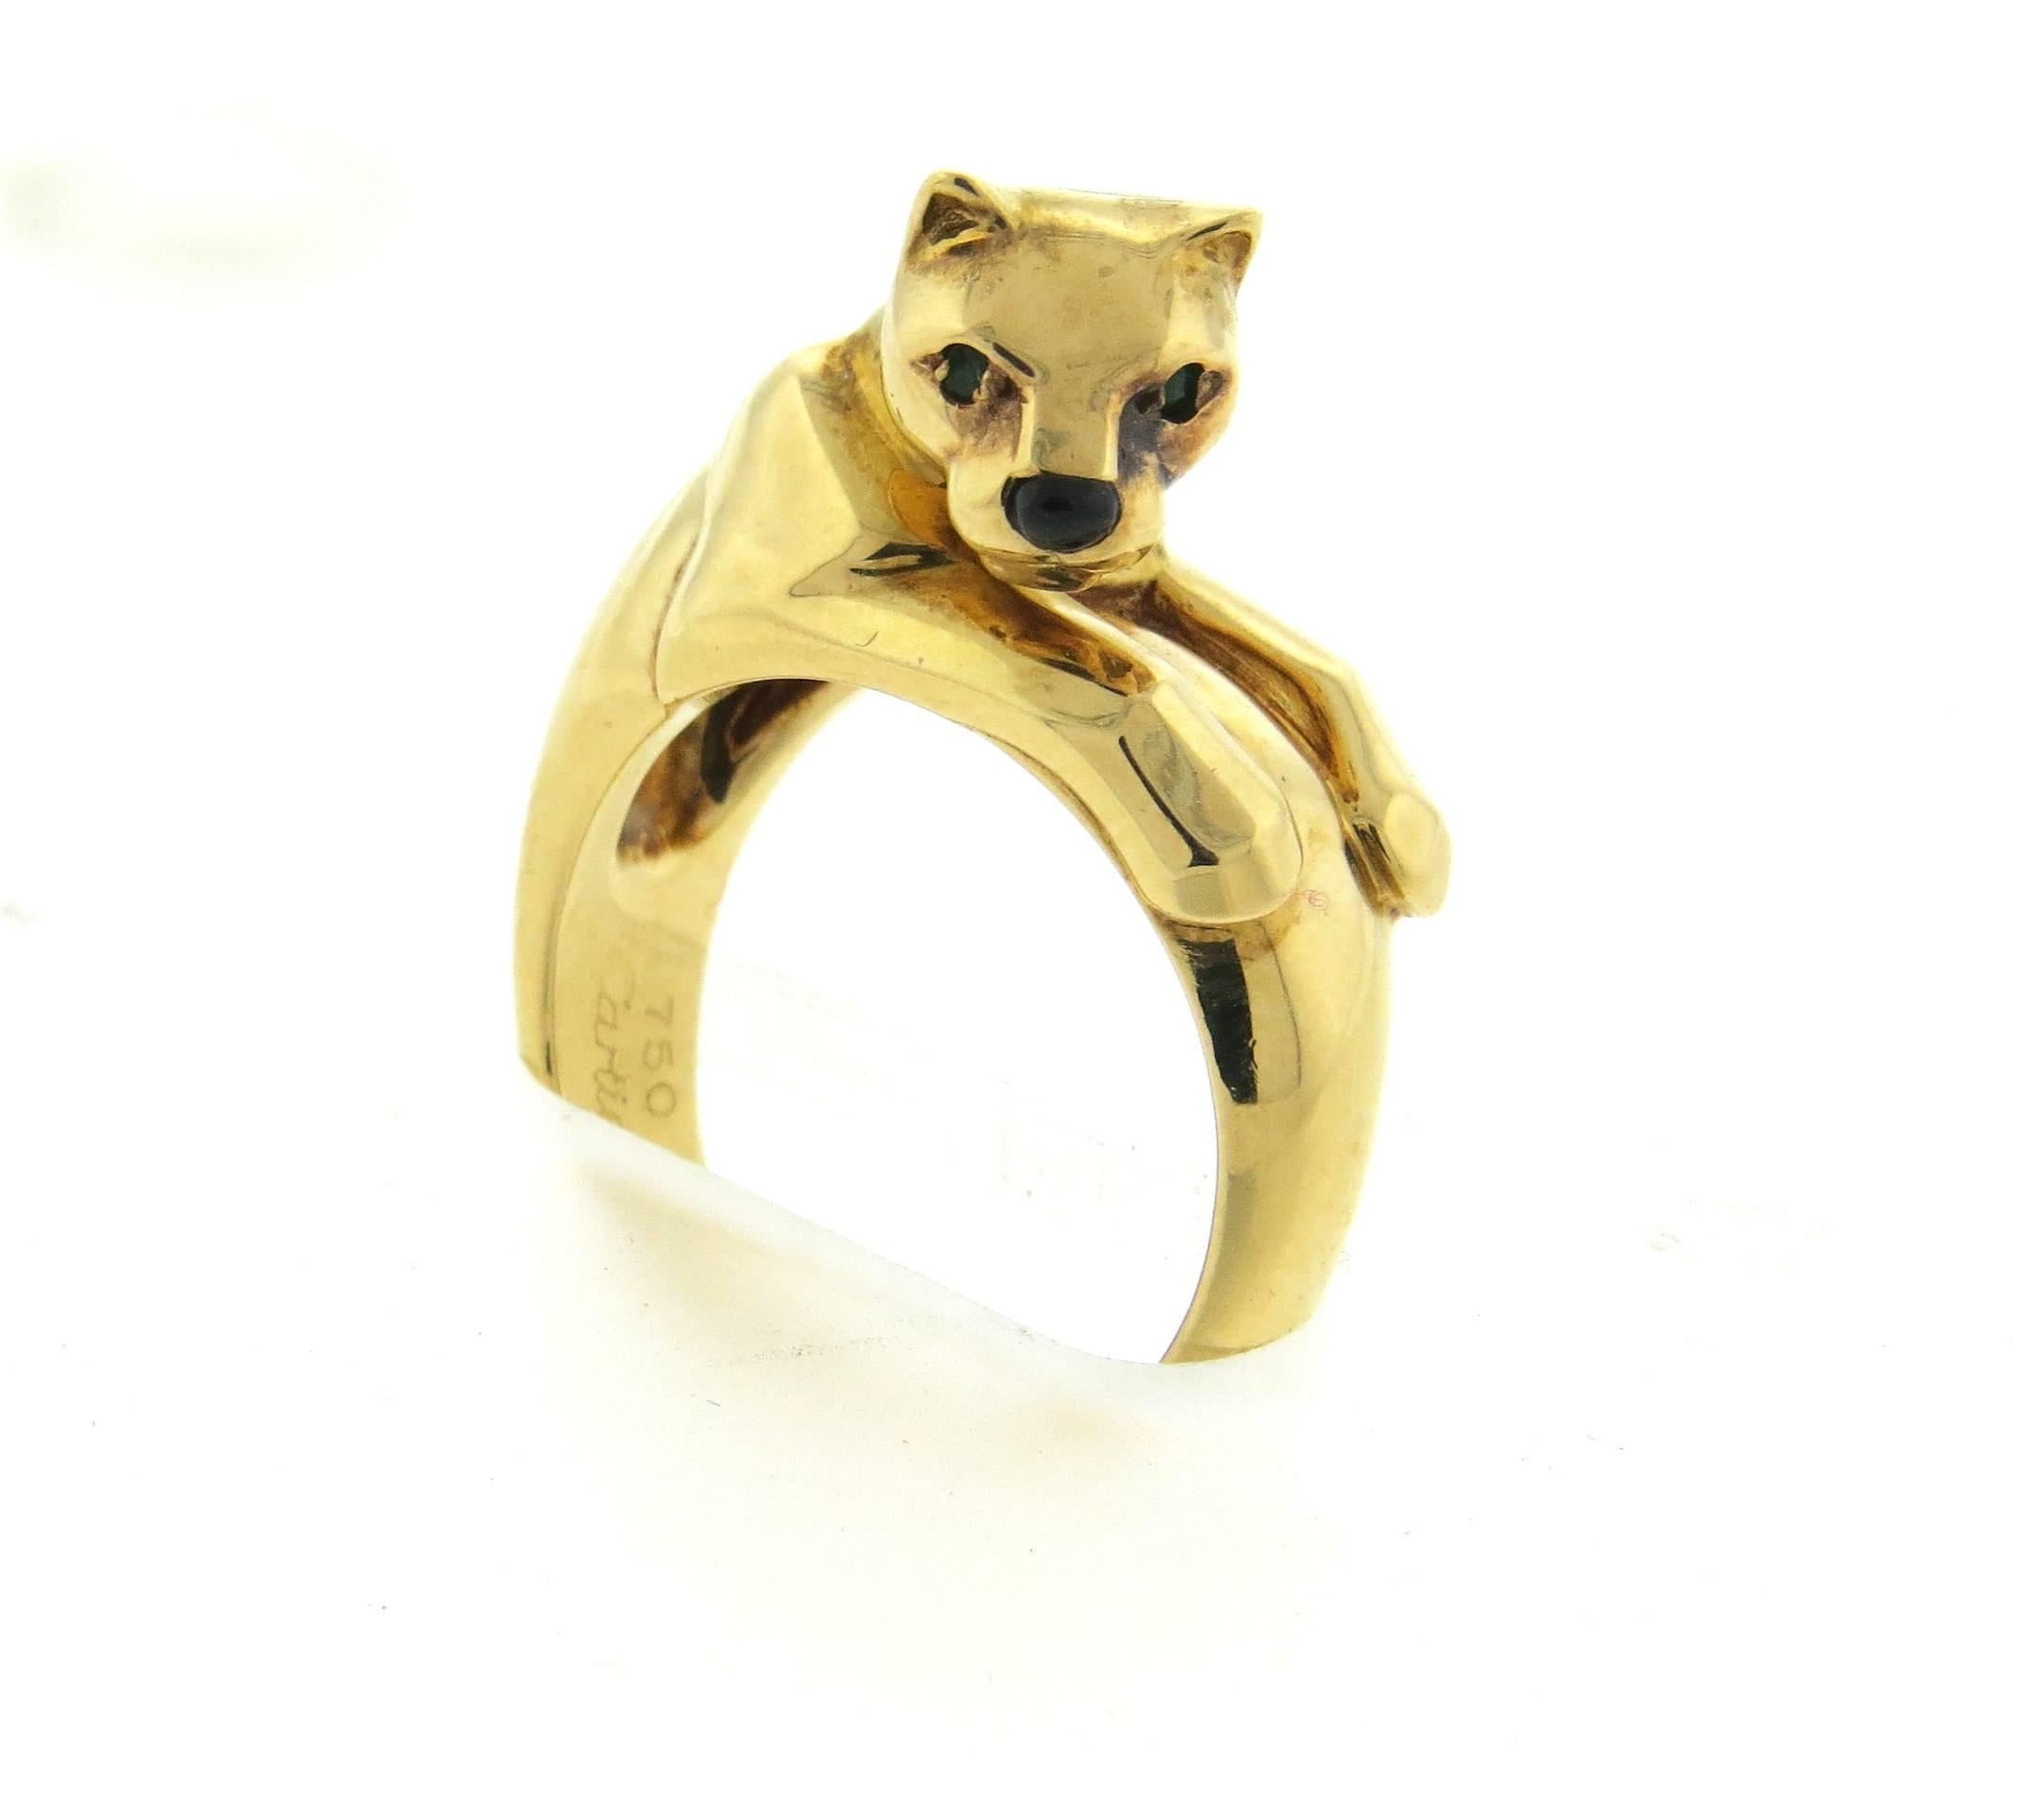 18k yellow gold panther ring, crafted by Cartier for Panthere collection, decorated with black onyx nose and emerald eyes. Ring size 6, ring top is 10mm wide and sits approx. 11mm from the finger top. Marked:  	750, Cartier, 52, 900822. Weight of